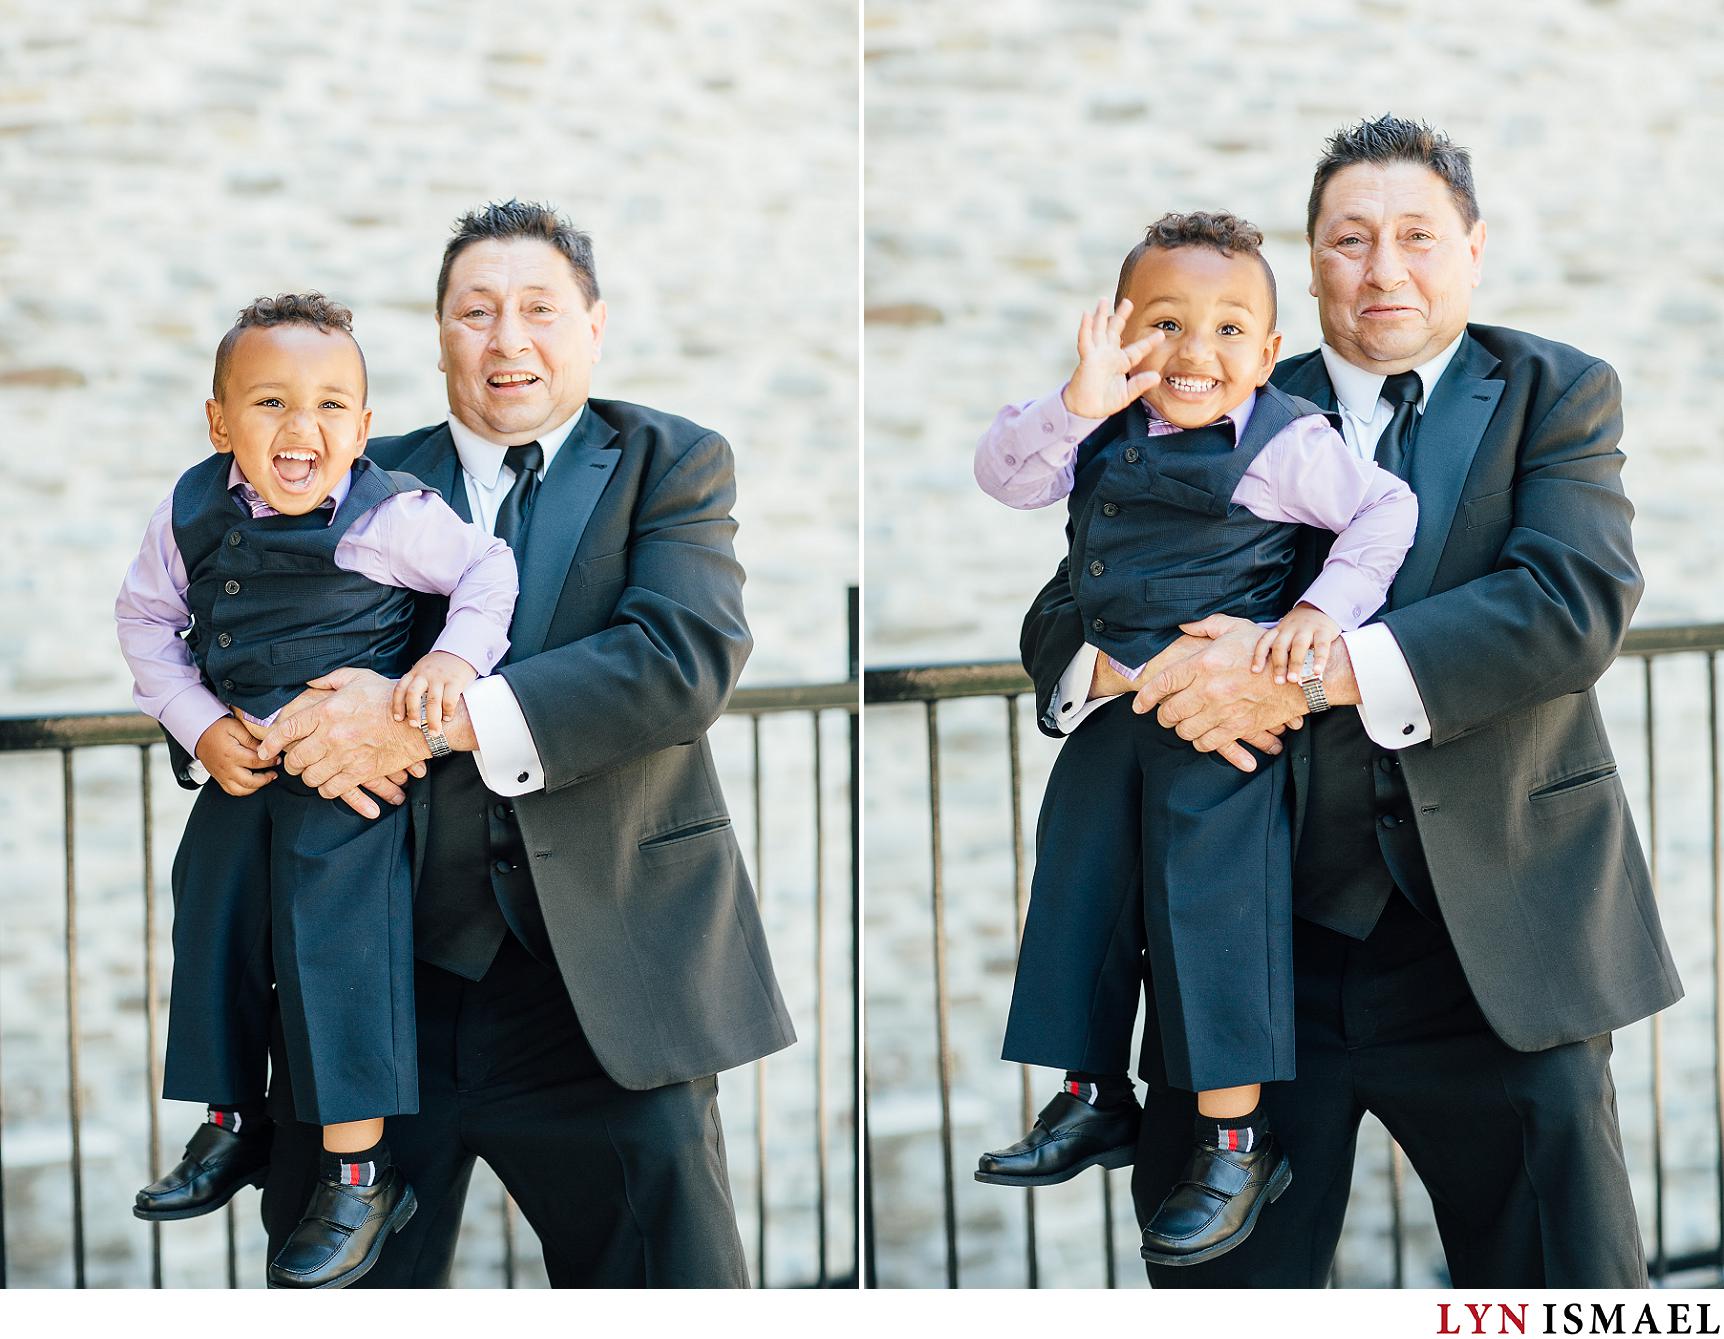 A cute toddler poses with his father on his wedding day.